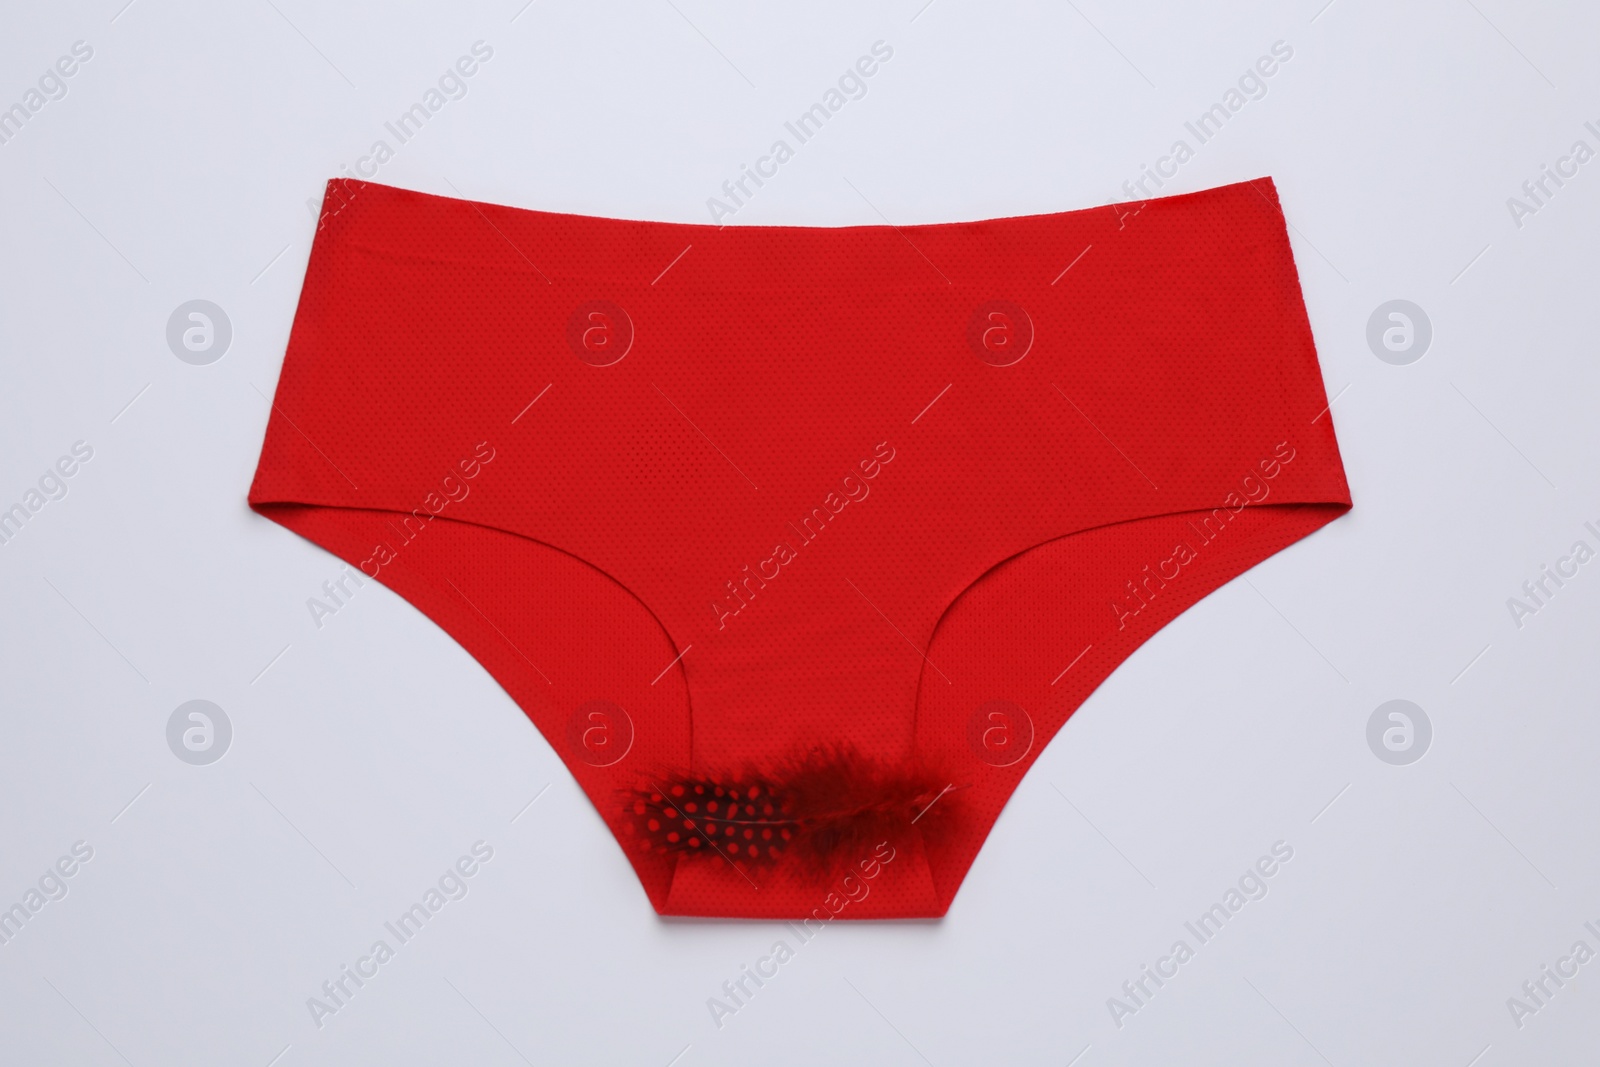 Photo of Woman's panties with red feather on white background, top view. Menstrual cycle